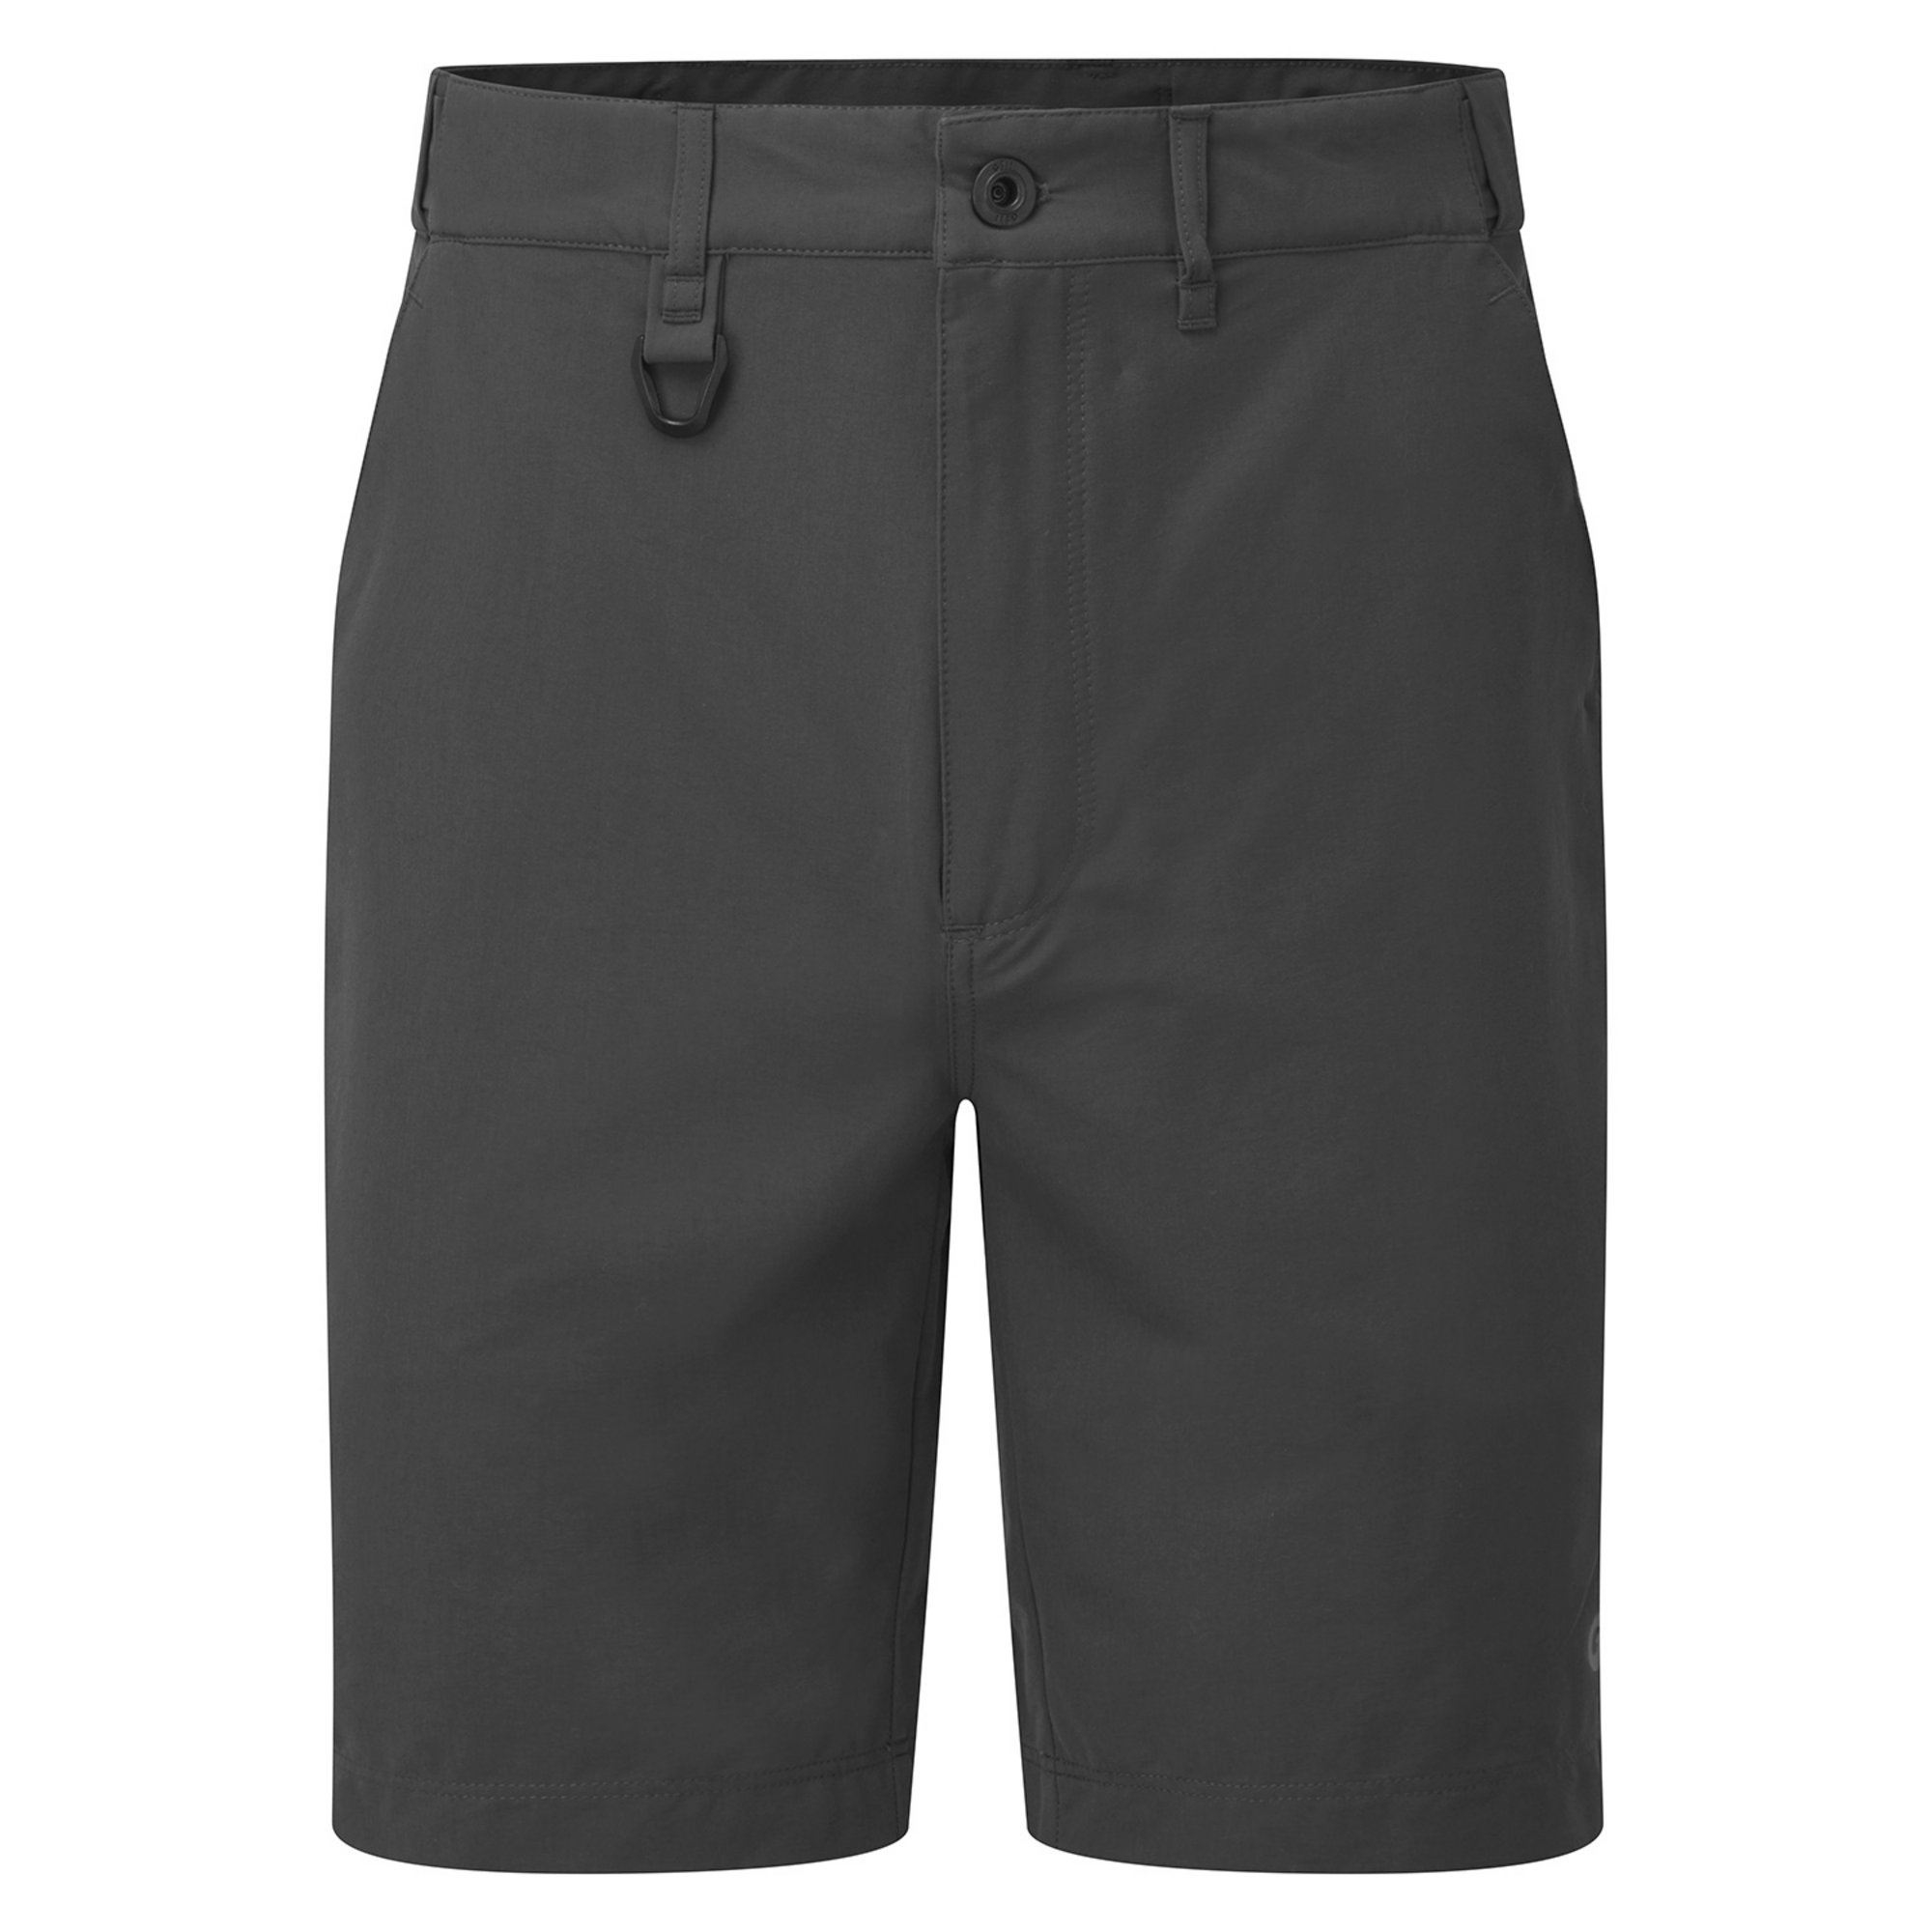 FG140: Excursion Short - The Excursion Shorts feature our XPEL® finish ...